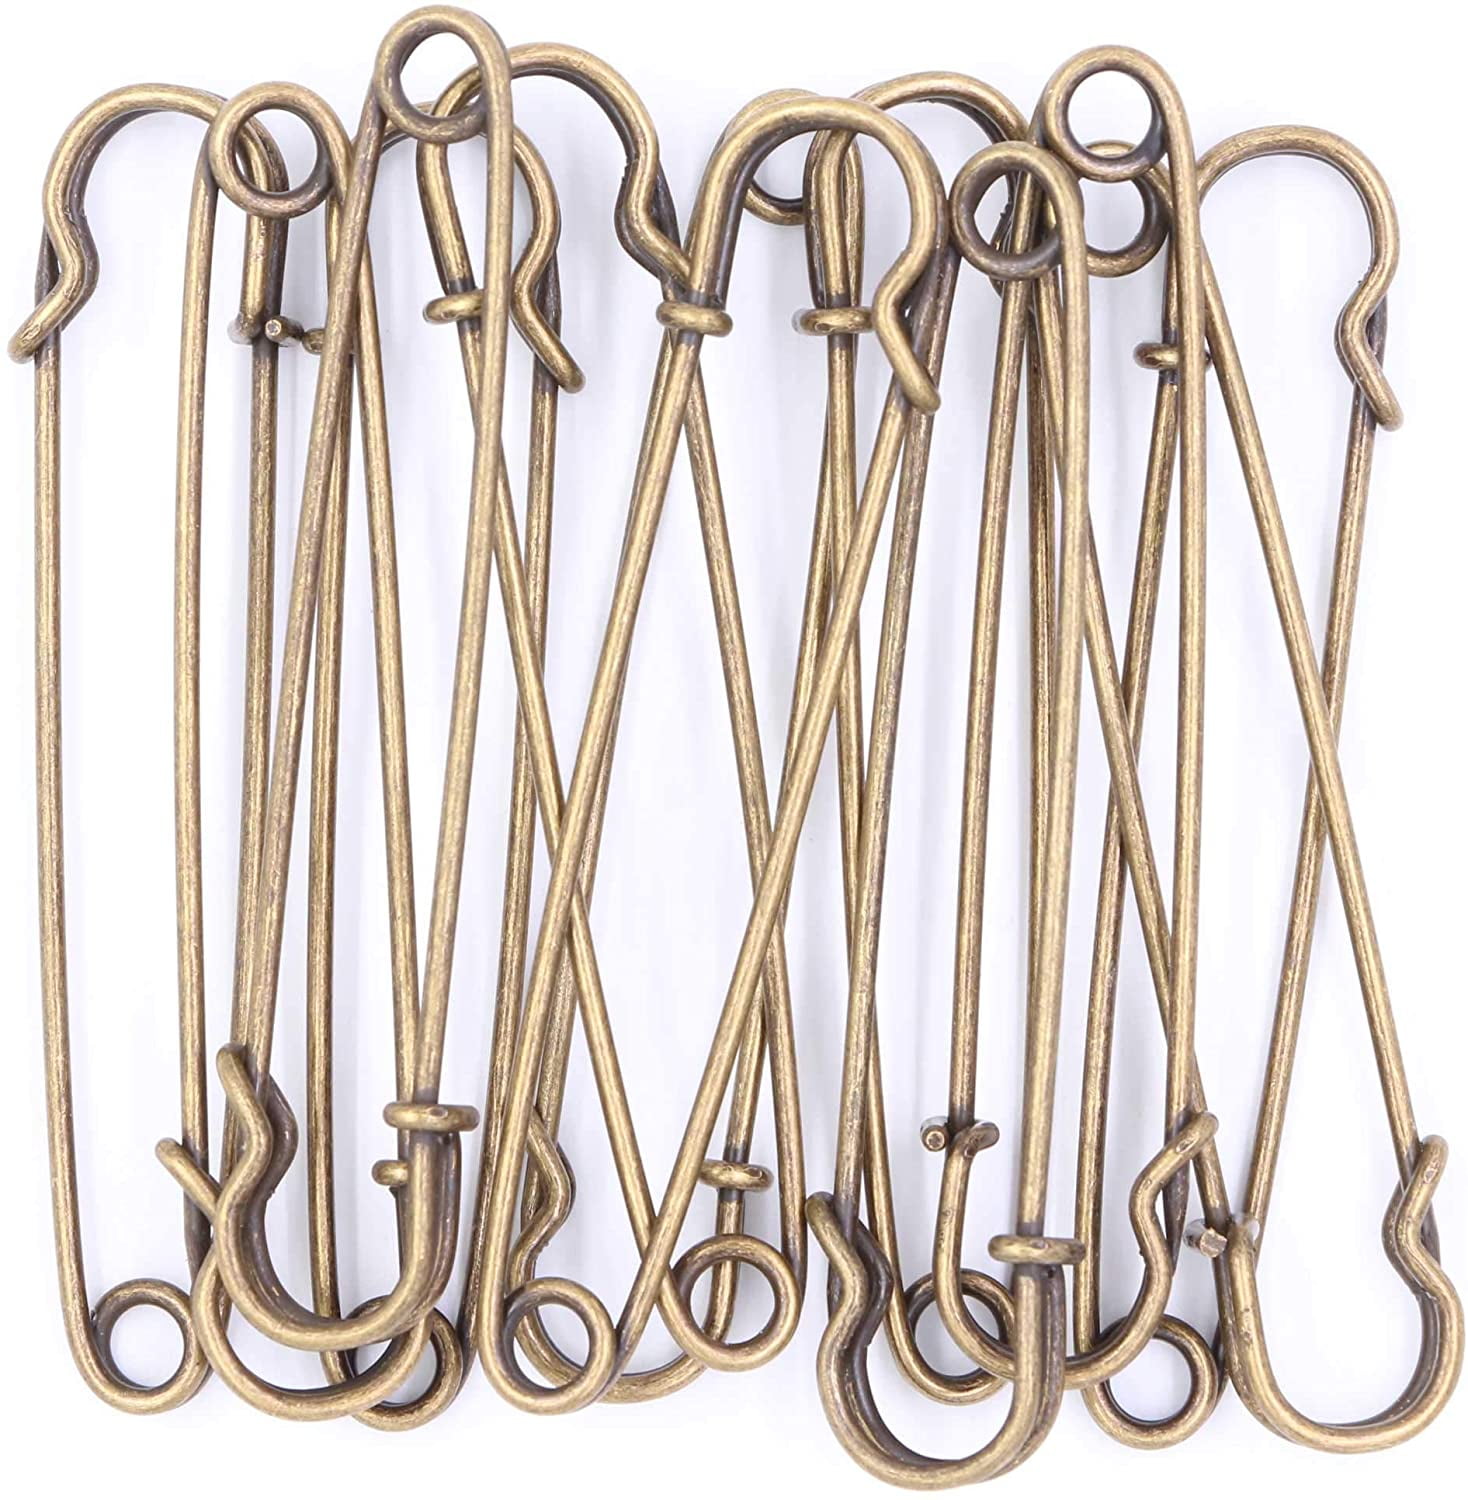 Sea Star 12pcs Extra-Large 4inch Steel Safety Pins - Blankets Skirts Kilts Crafts (4inch 4silver&4black & 4bronze)